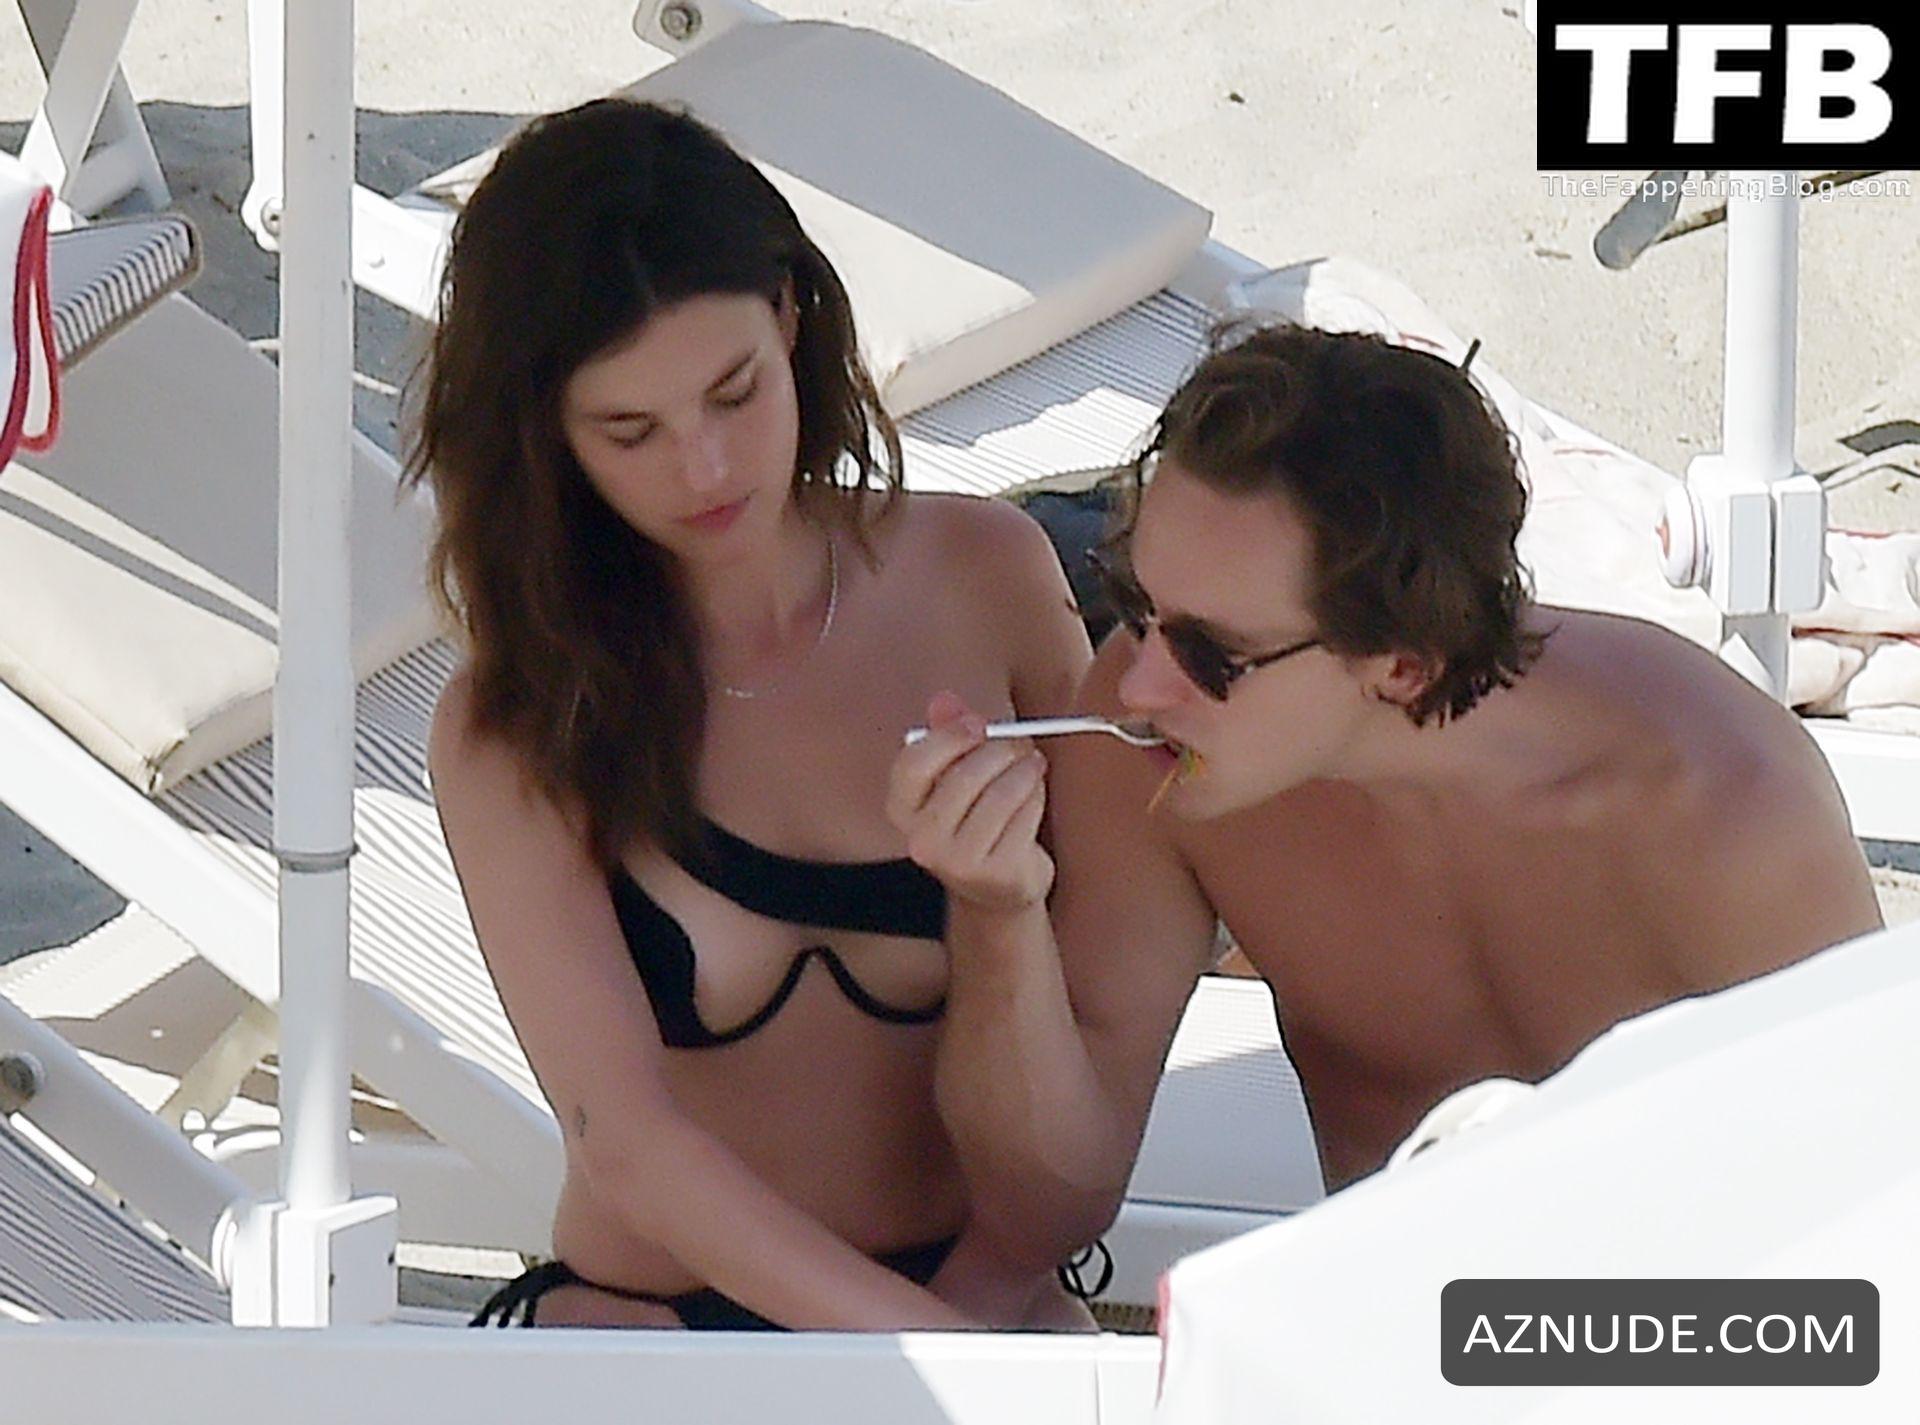 Rainey Qualley Sexy Seen Flaunting Her Hot Figure Wearing A Bikini With Lewis Pullman In 